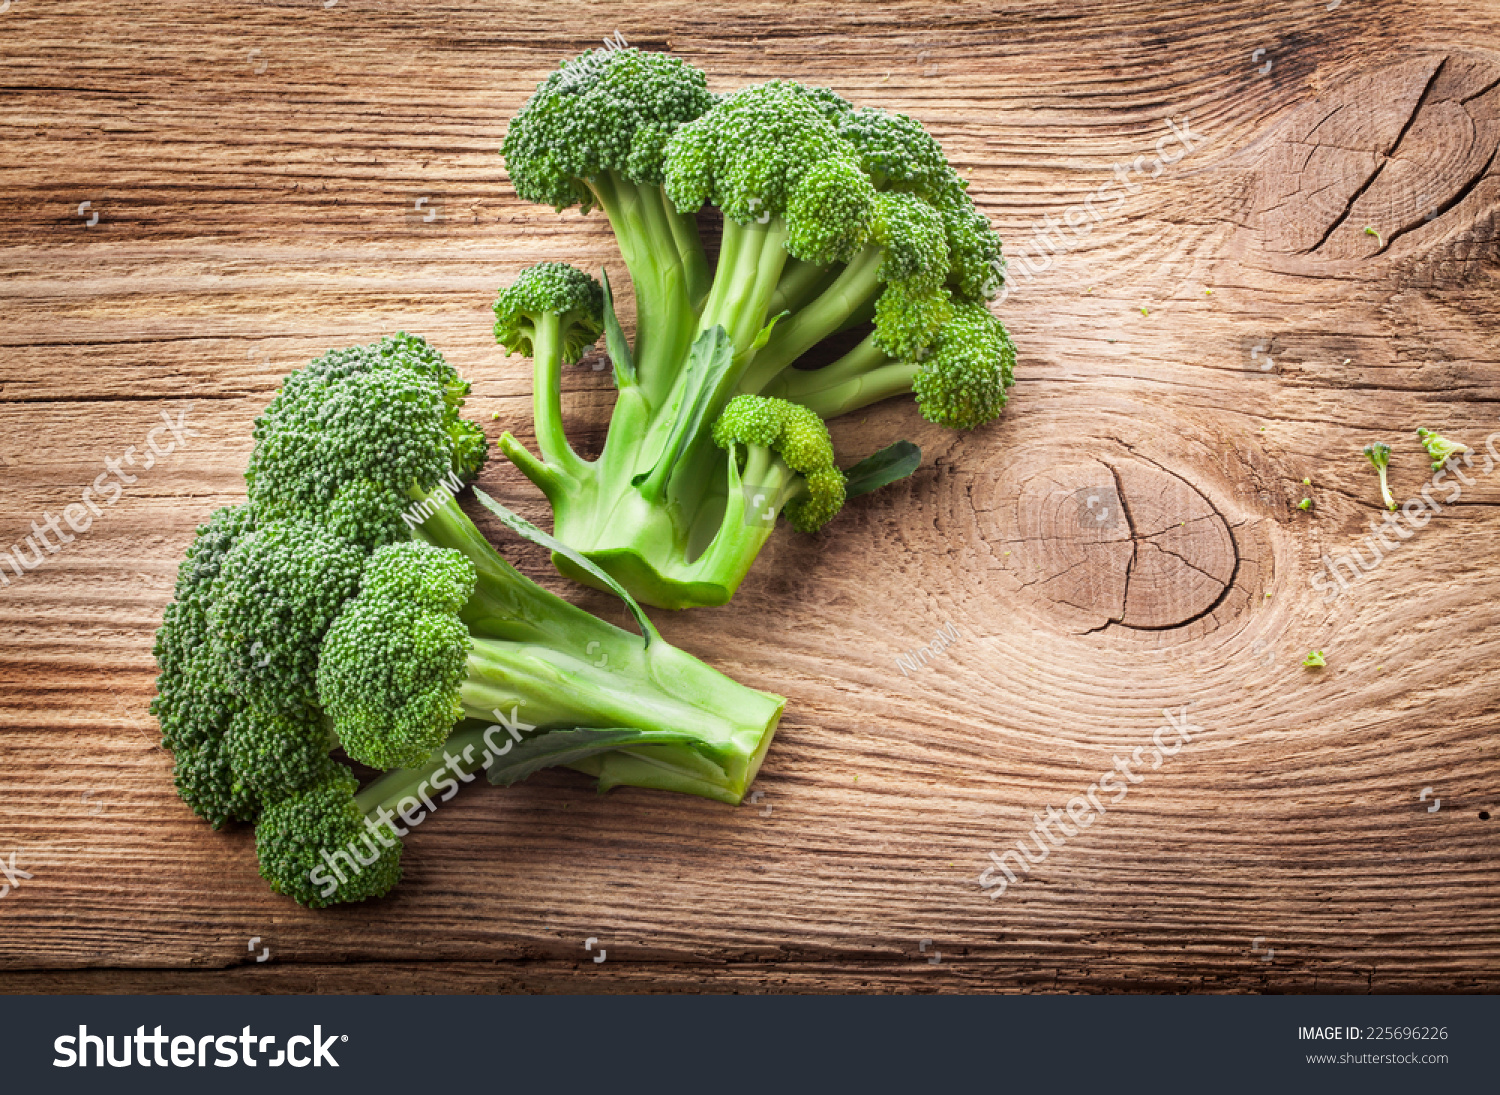 Fresh broccoli on the wooden table #225696226